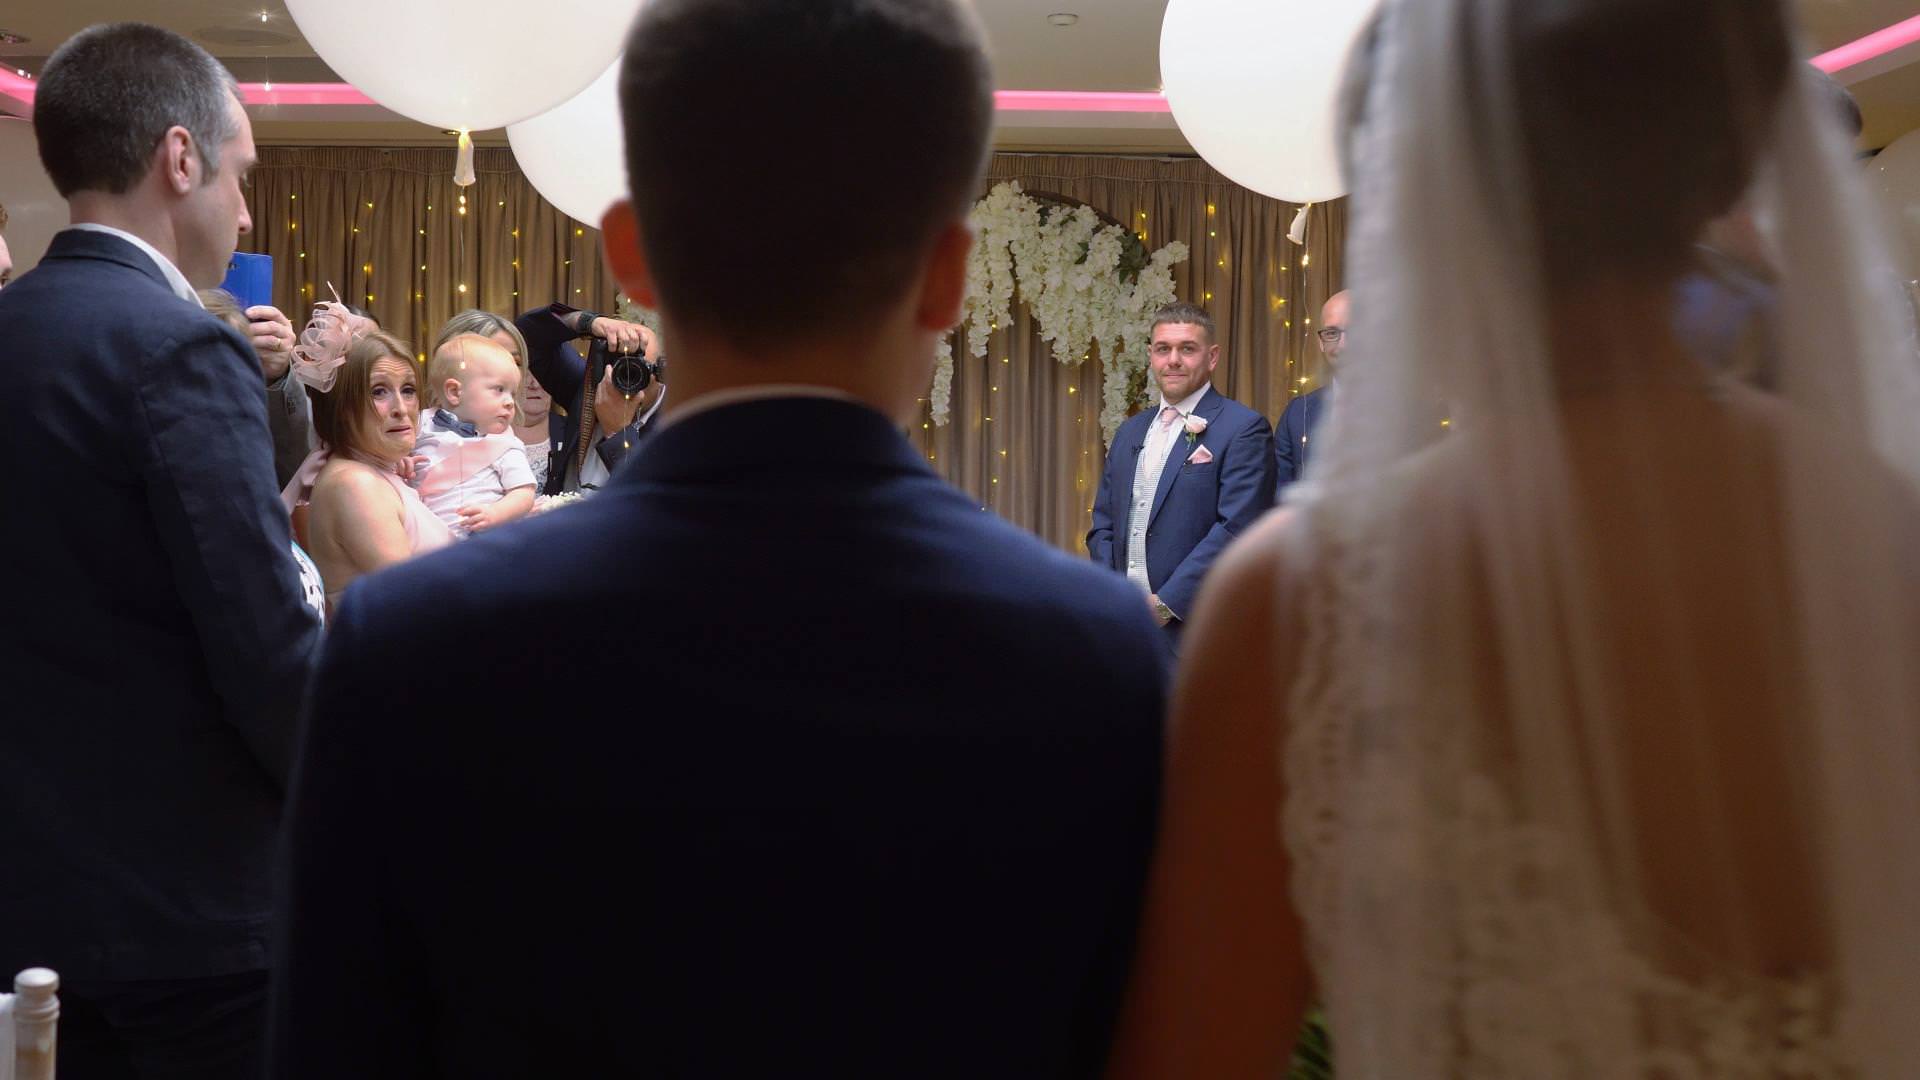 Video still of a groom turns to see his bride walk down the aisle at Moddershall Oaks